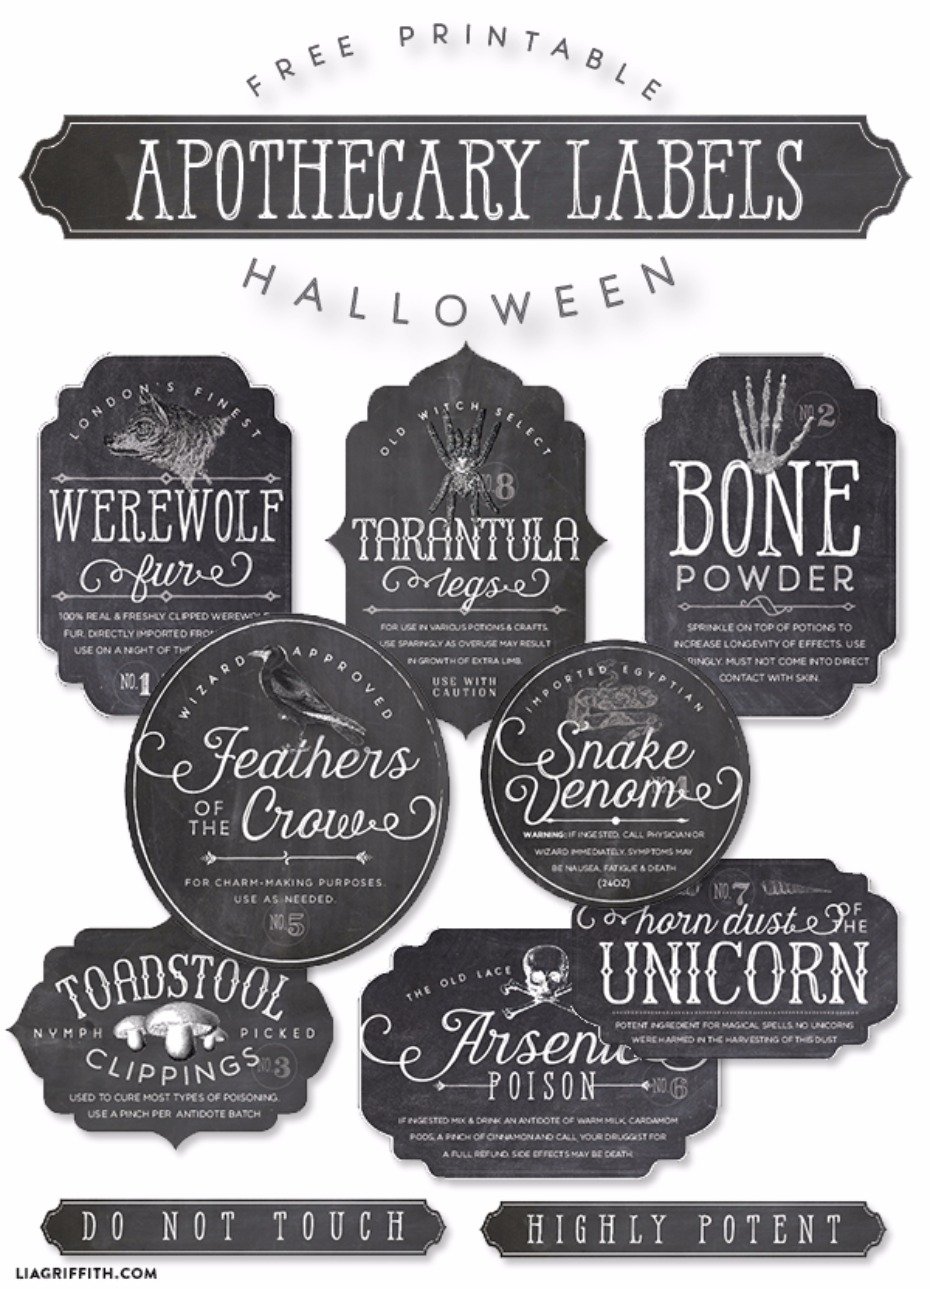 Apothecary printable labels